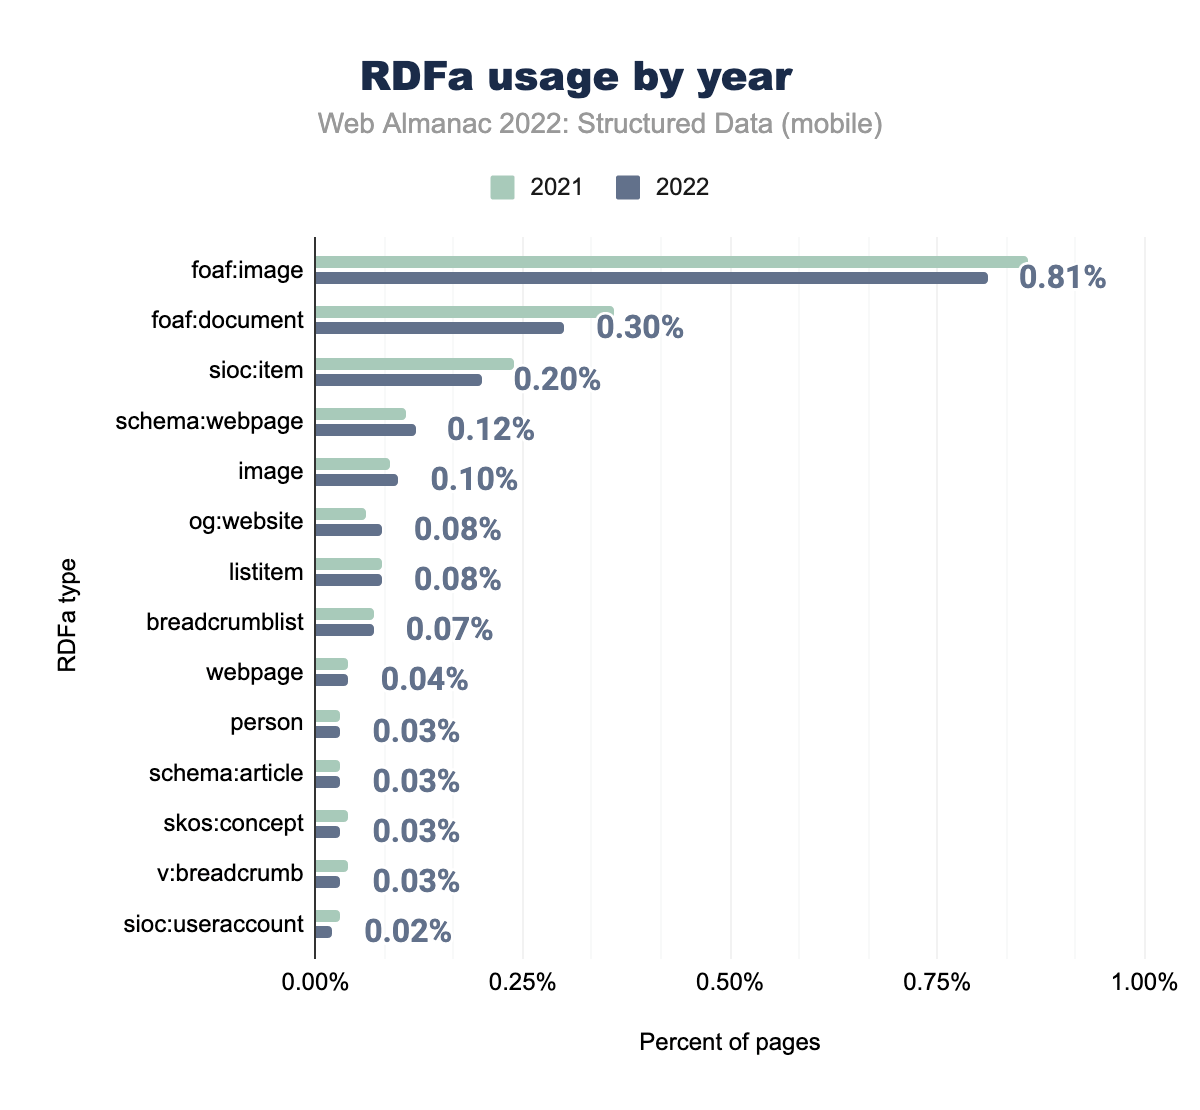 RDFa usage by year on mobile